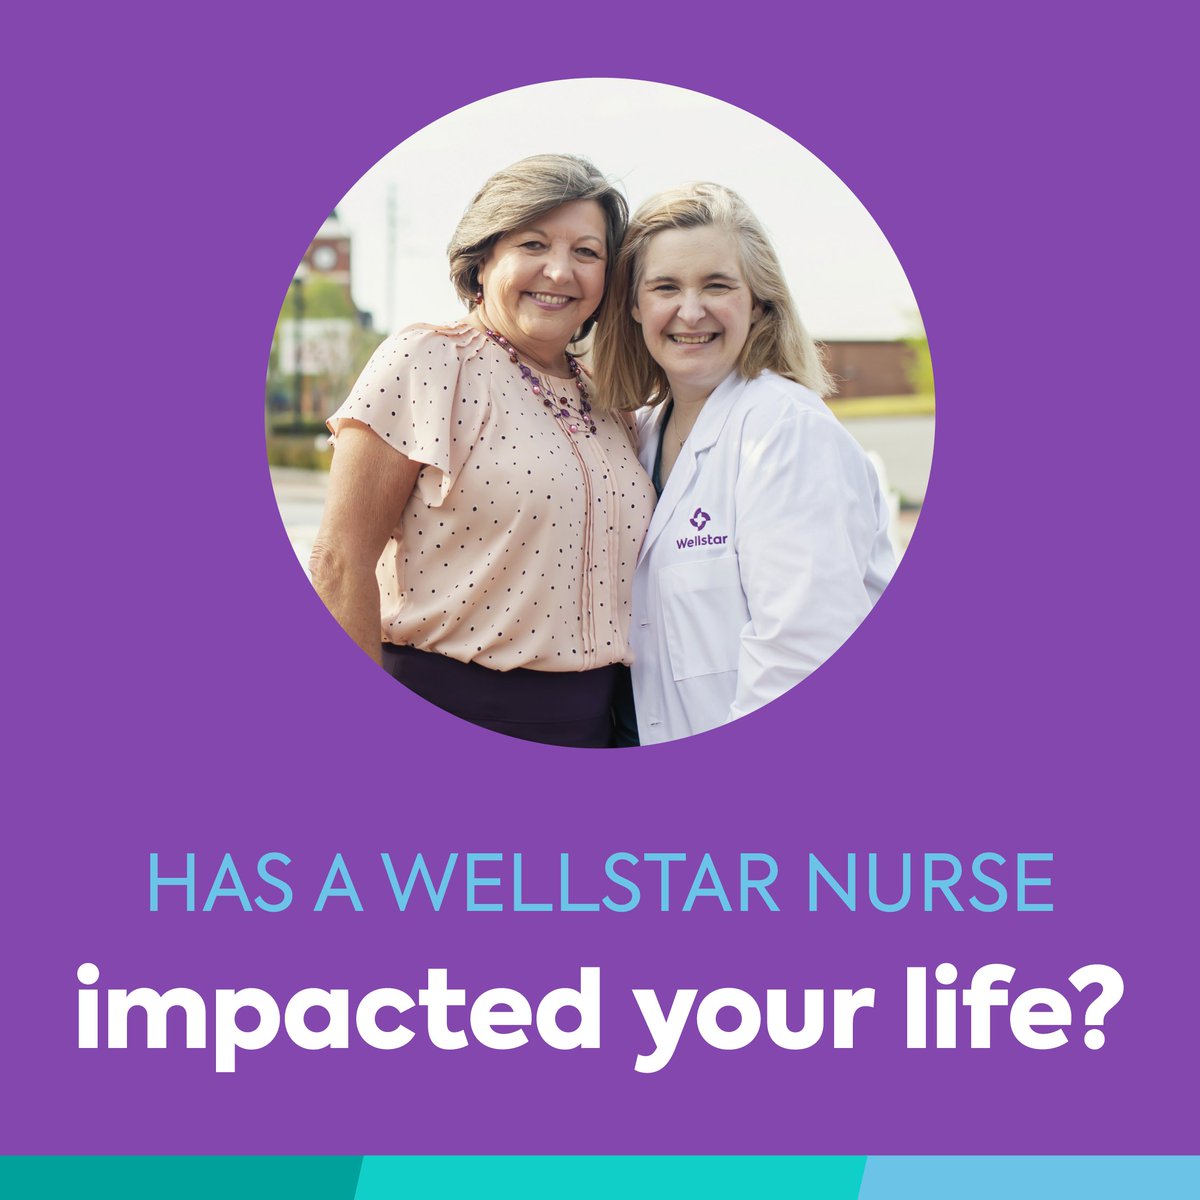 Wellstar proudly supports National Nurses Week. Please consider making a gift to the Wellstar Foundation in a nurse's honor. Your support directly benefits our nurses by providing resources, training opportunities and innovative programs. Give today at spr.ly/6016jjA3u.